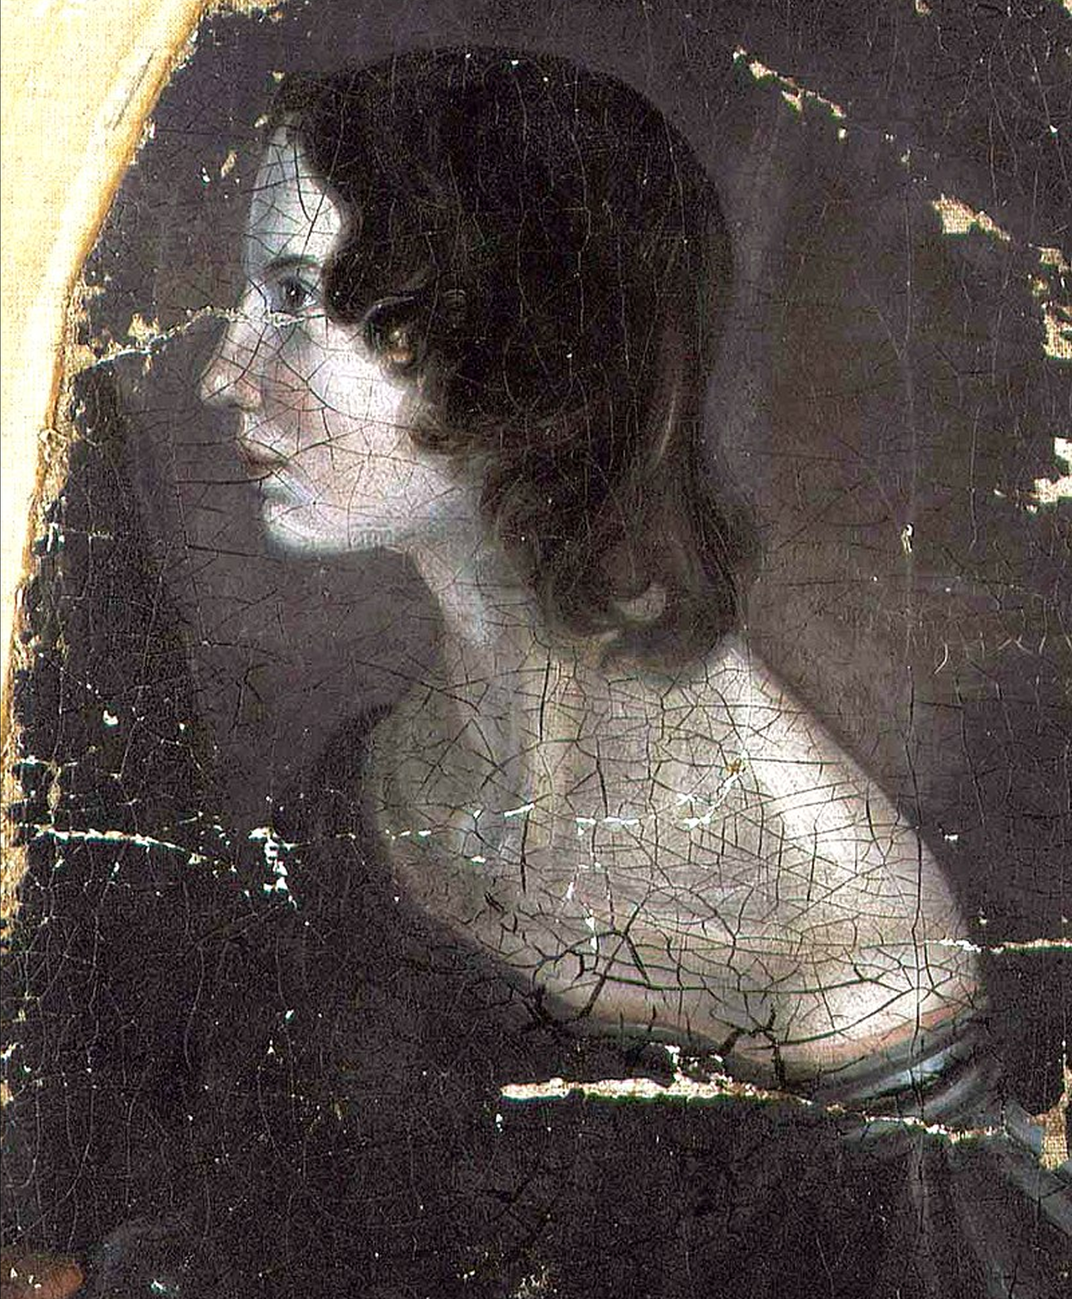 Branwell's 1833 portrait of either Emily or Anne